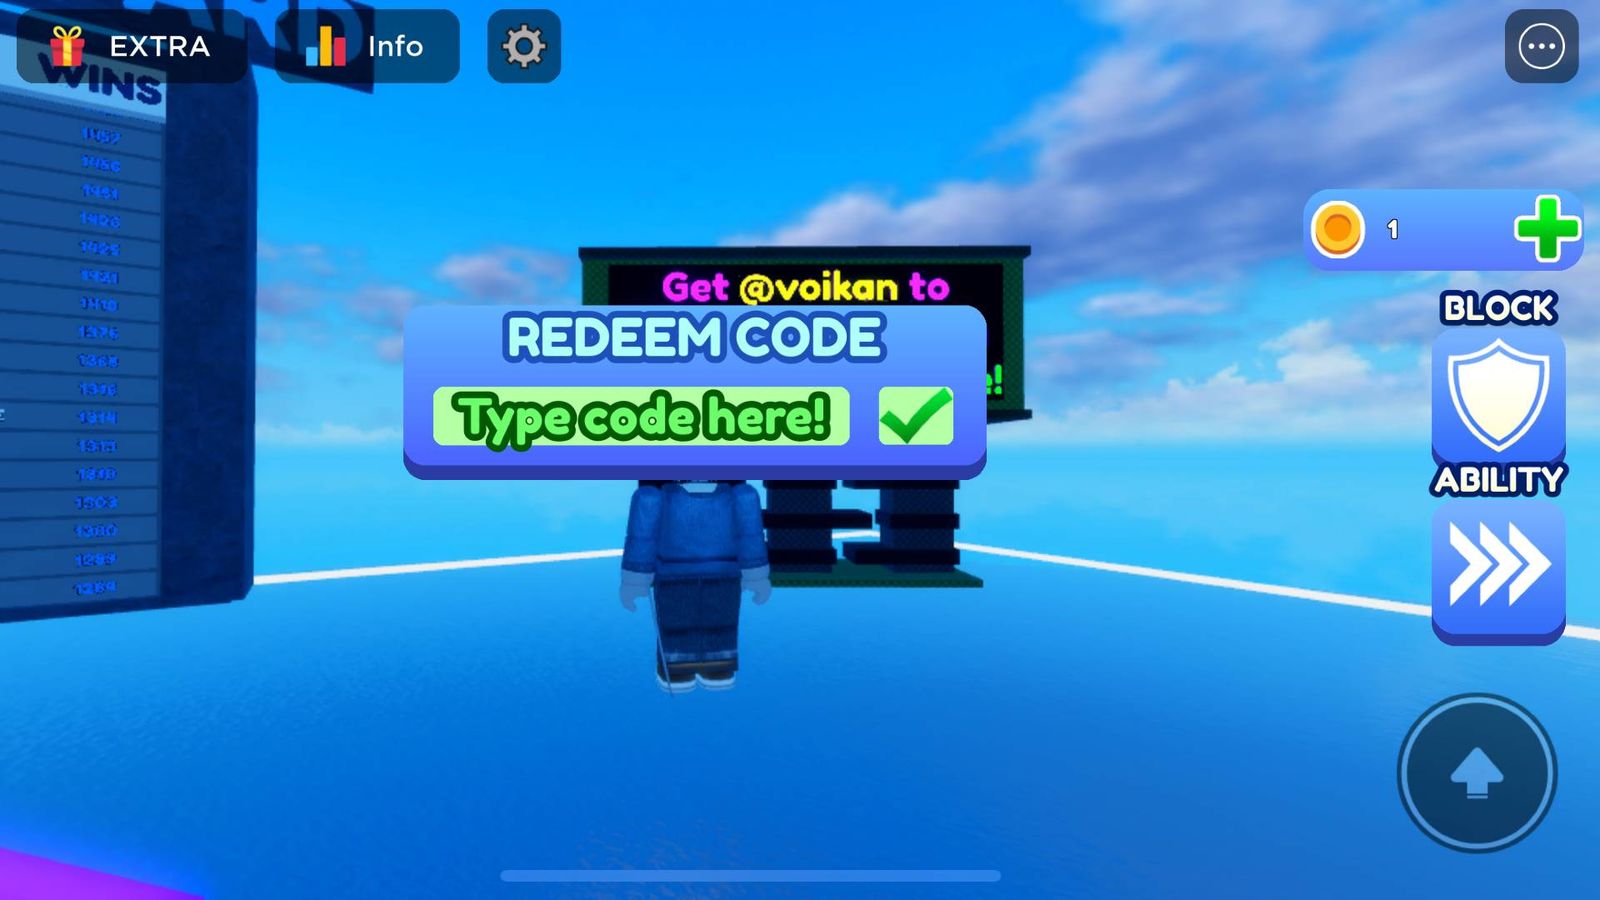 The code redemption page in Blade Ball on Roblox.